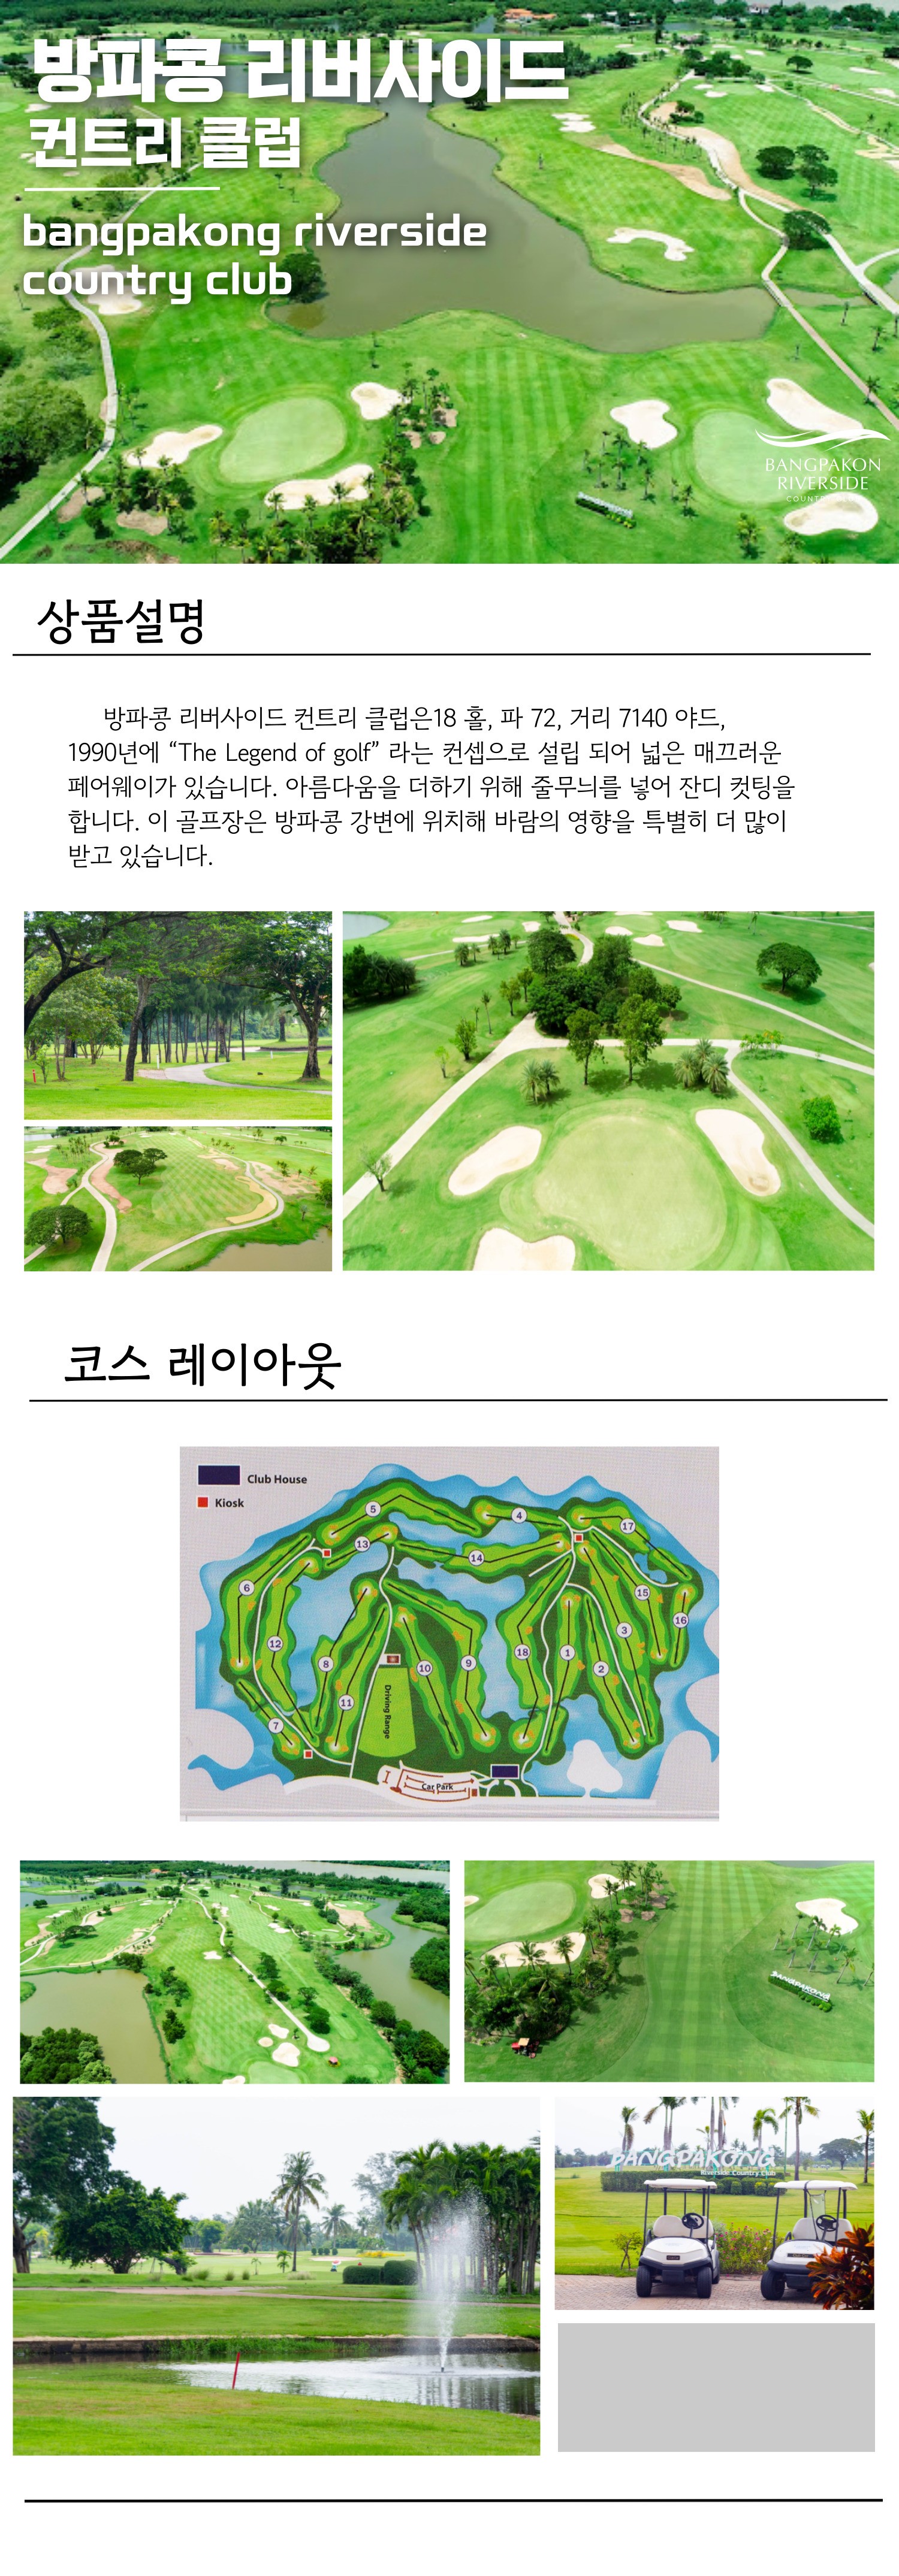 https://img5.pic.in.th/file/secure-sv1/KTT-GOLF--004.jpeg